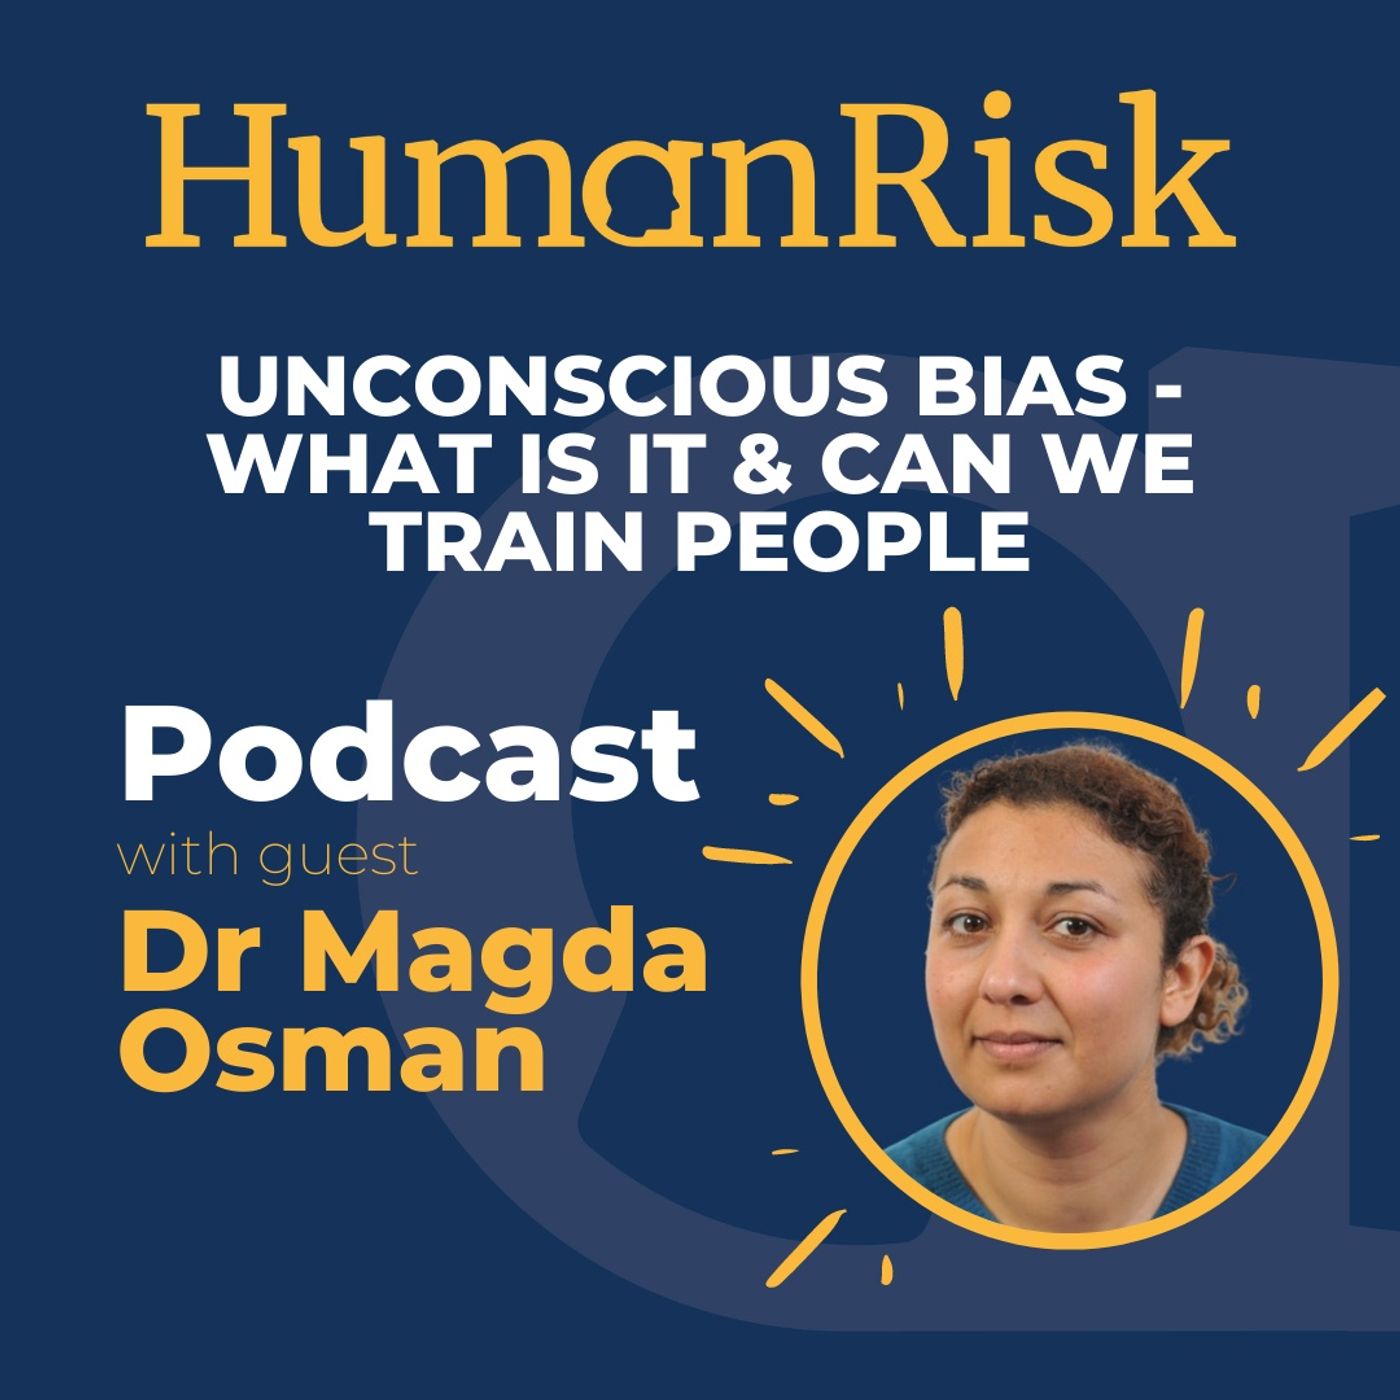 Dr Magda Osman on Unconscious Bias - what is it & can we train people to not display it?